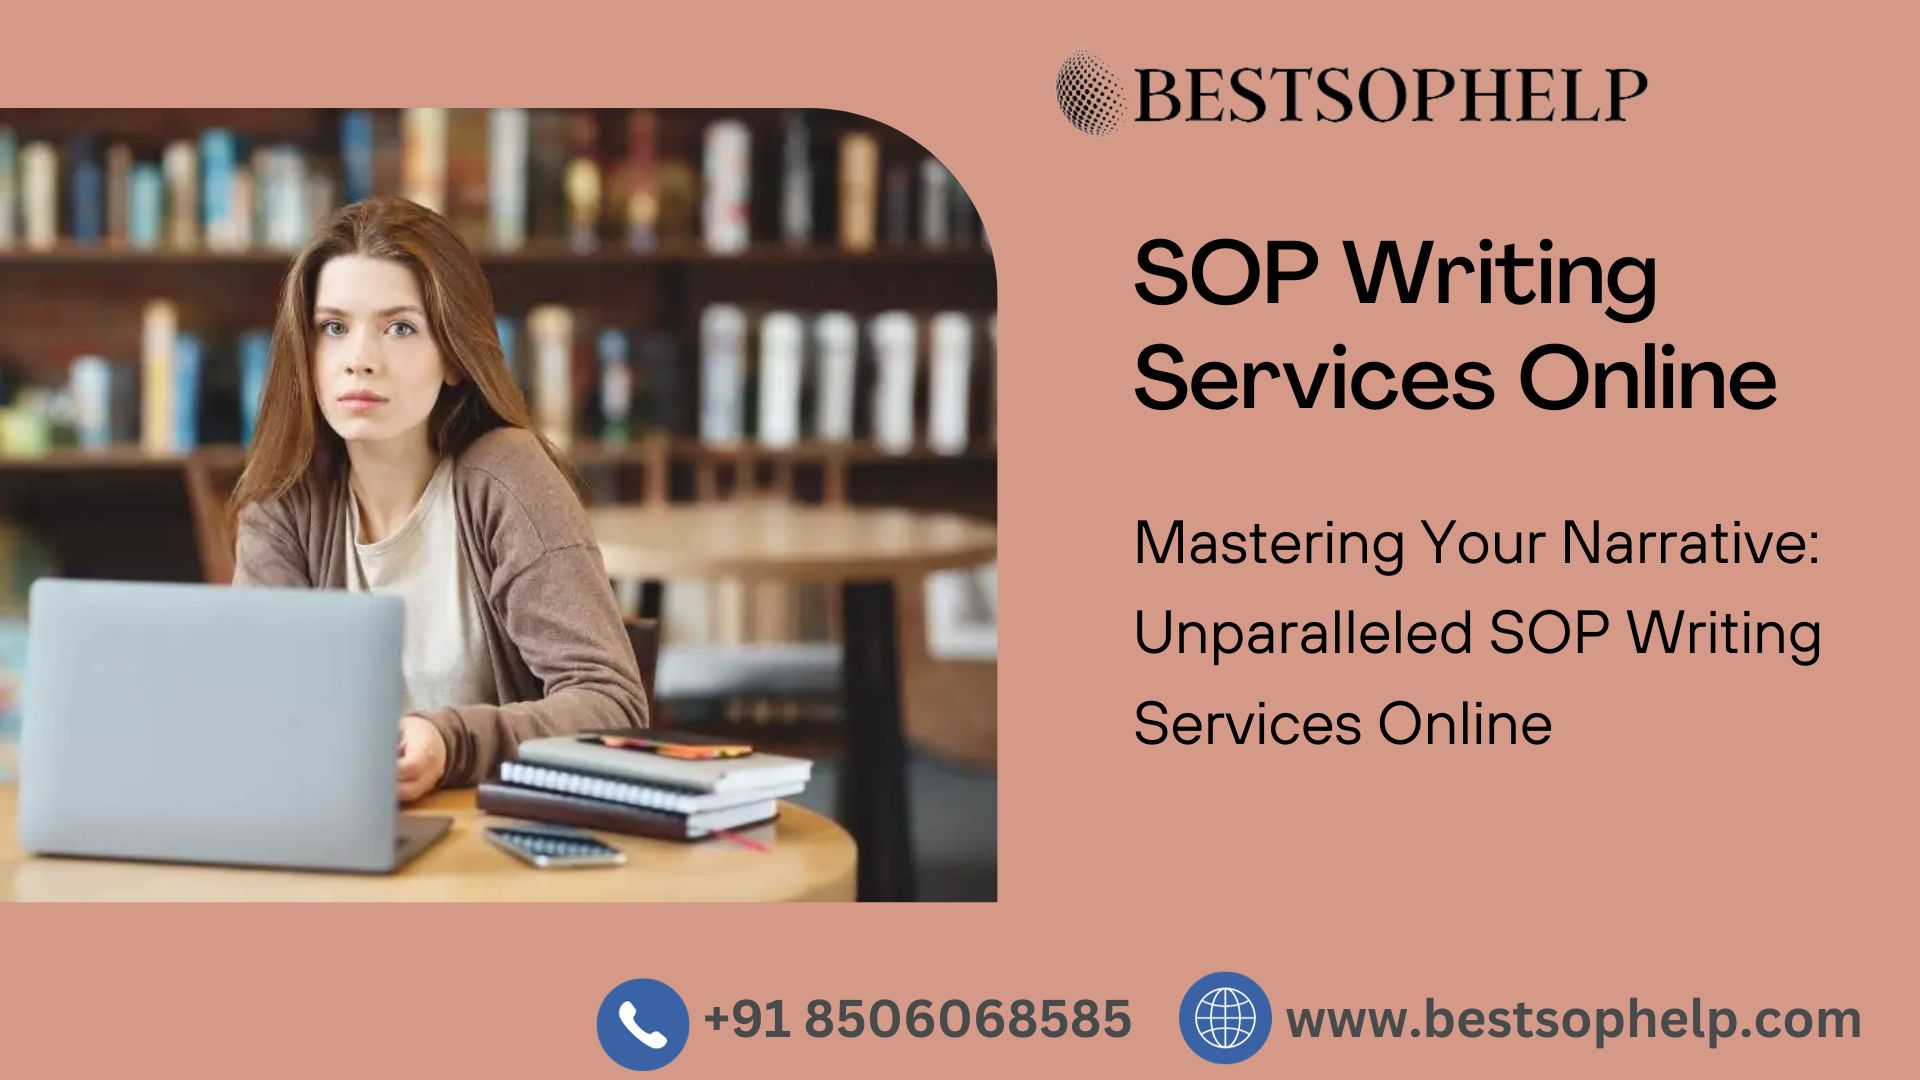 Mastering Your Narrative: Unparalleled SOP Writing Services Online